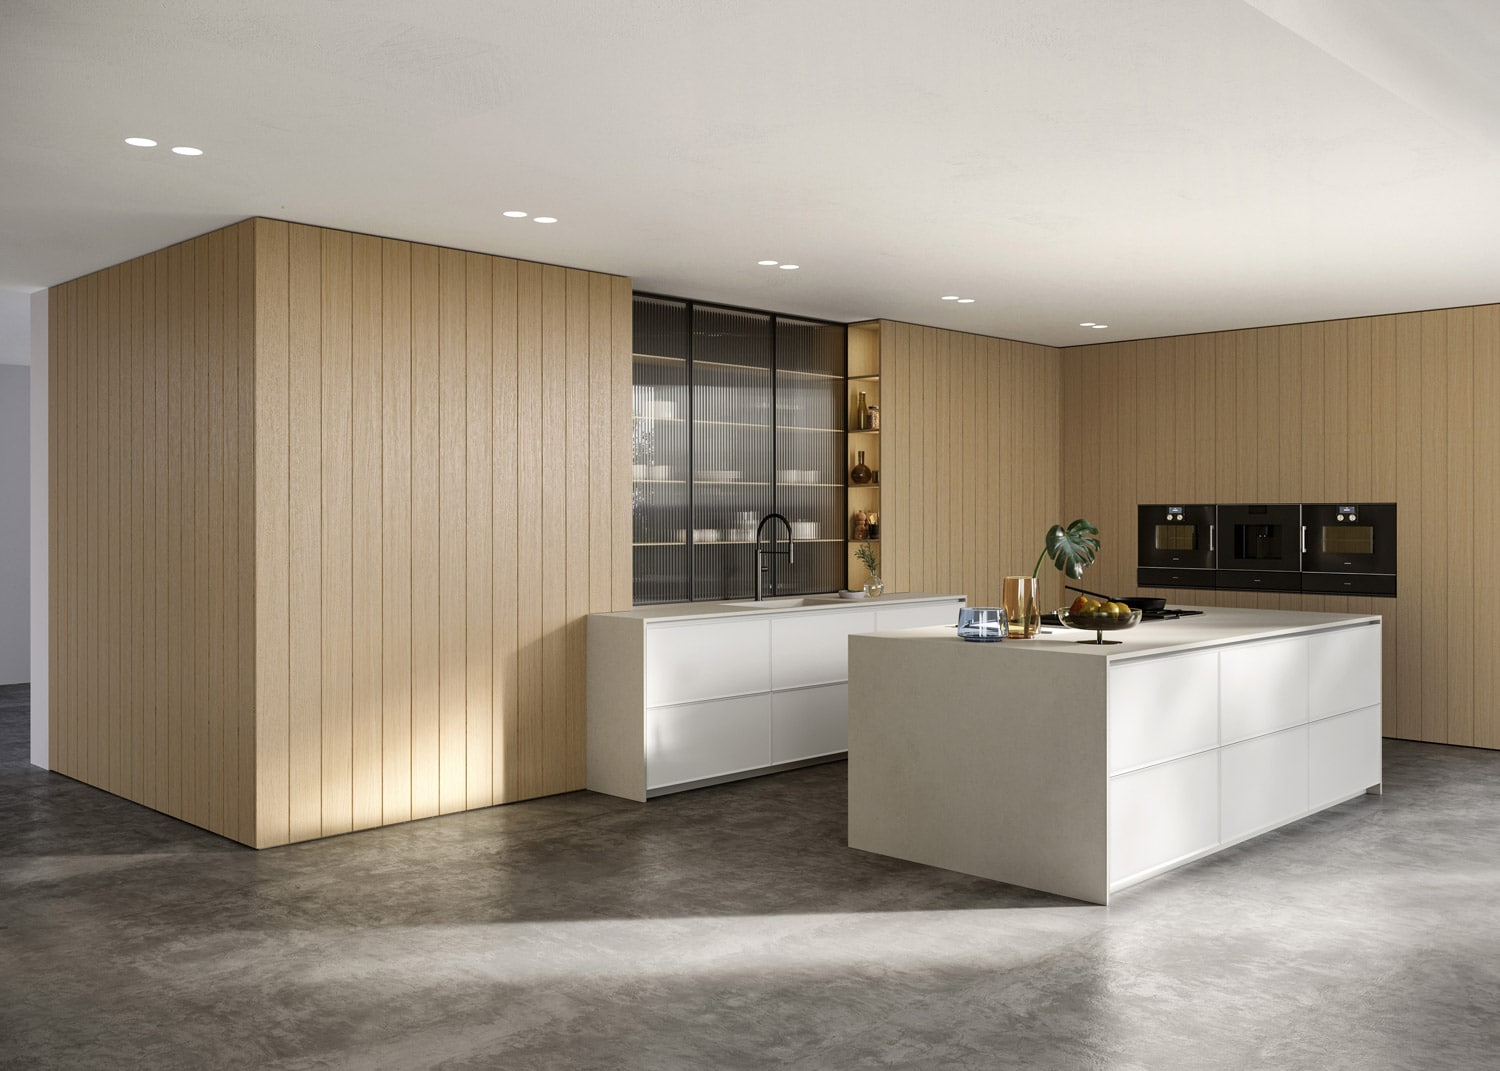 Bespoke kitchen design. The tall pantry units have handle-free doors dressed in slats of light oak. These details essentially hide the units from view, creating a contemporary furnishing effect.  